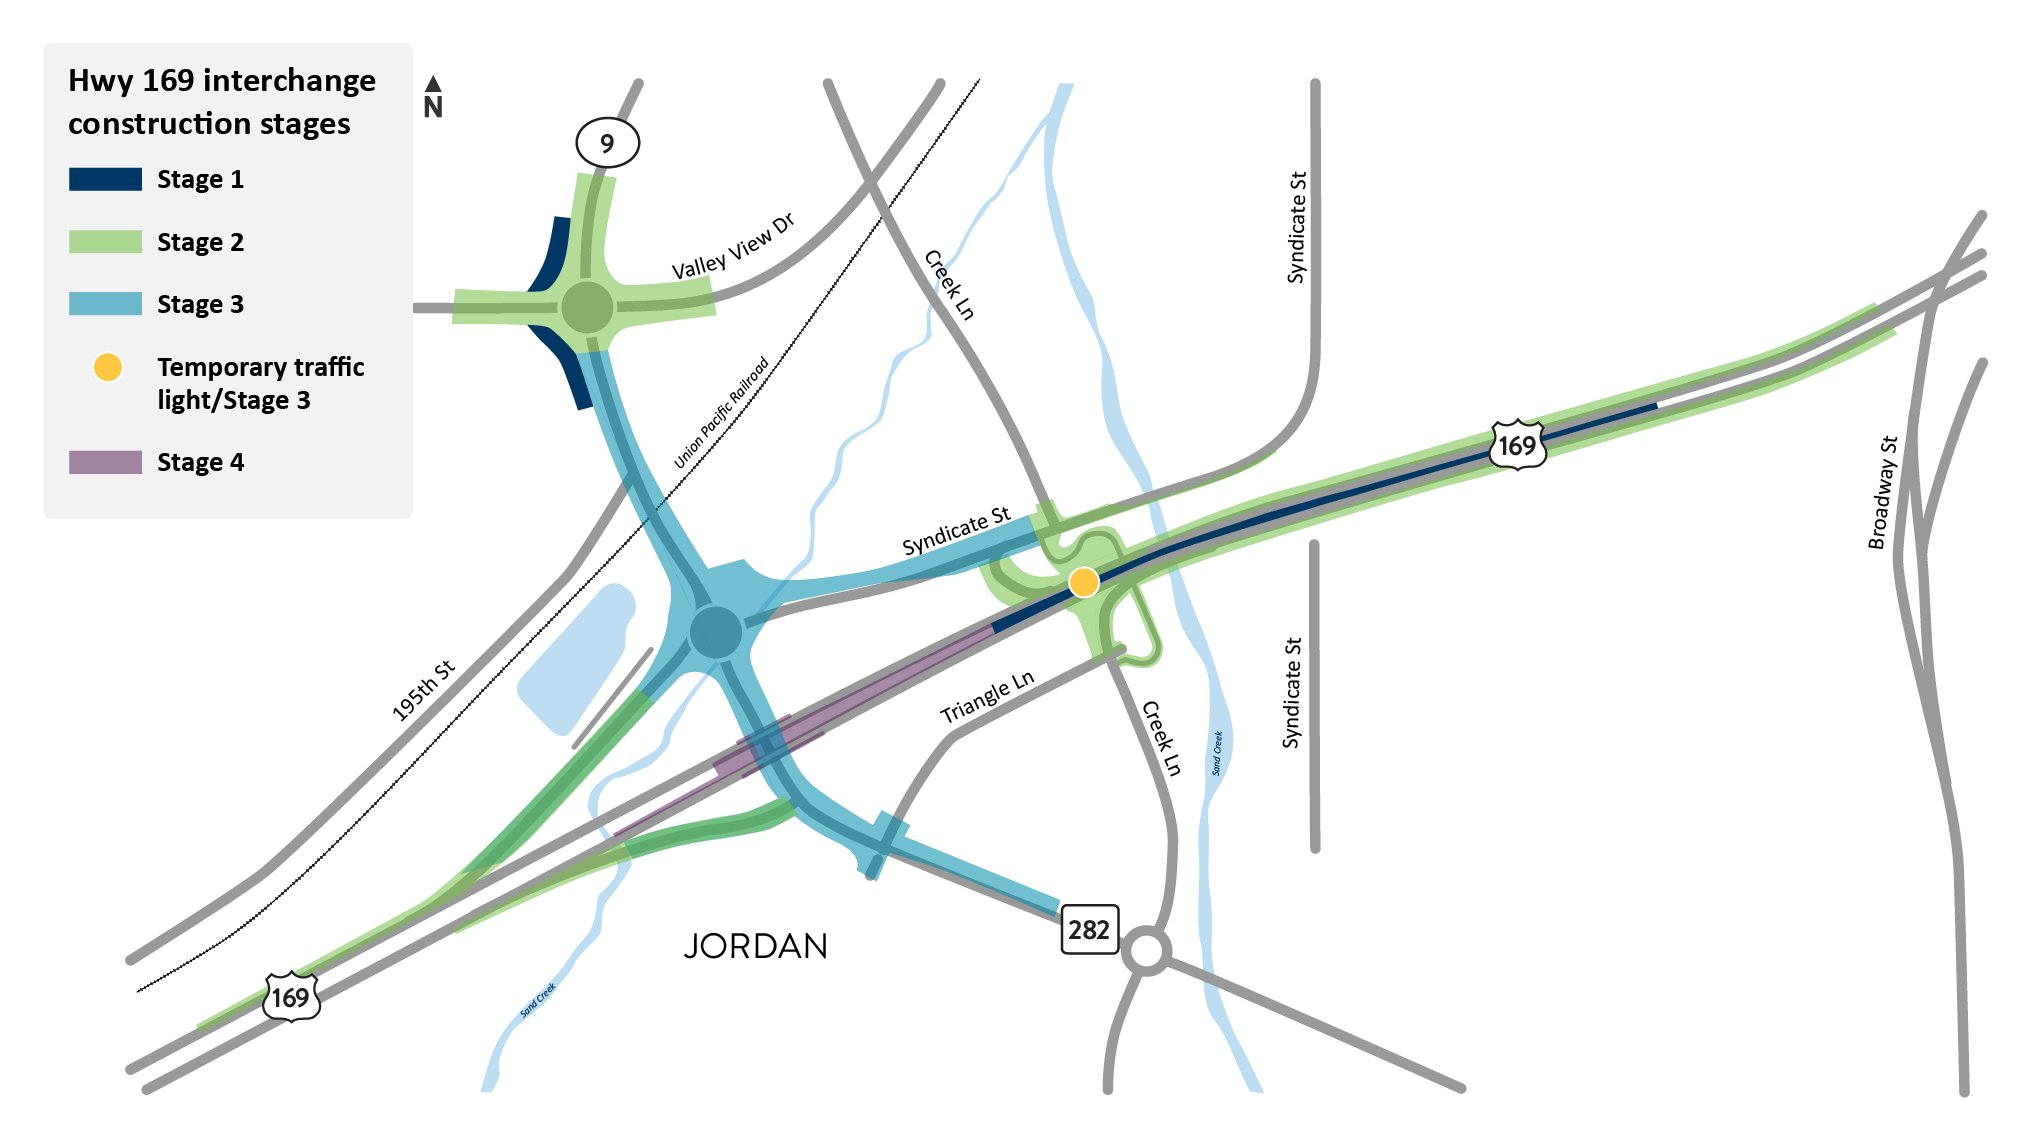 Intersection of Hwy 169 and Hwy 282/Co. Rd. 9 in Jordan project staging map